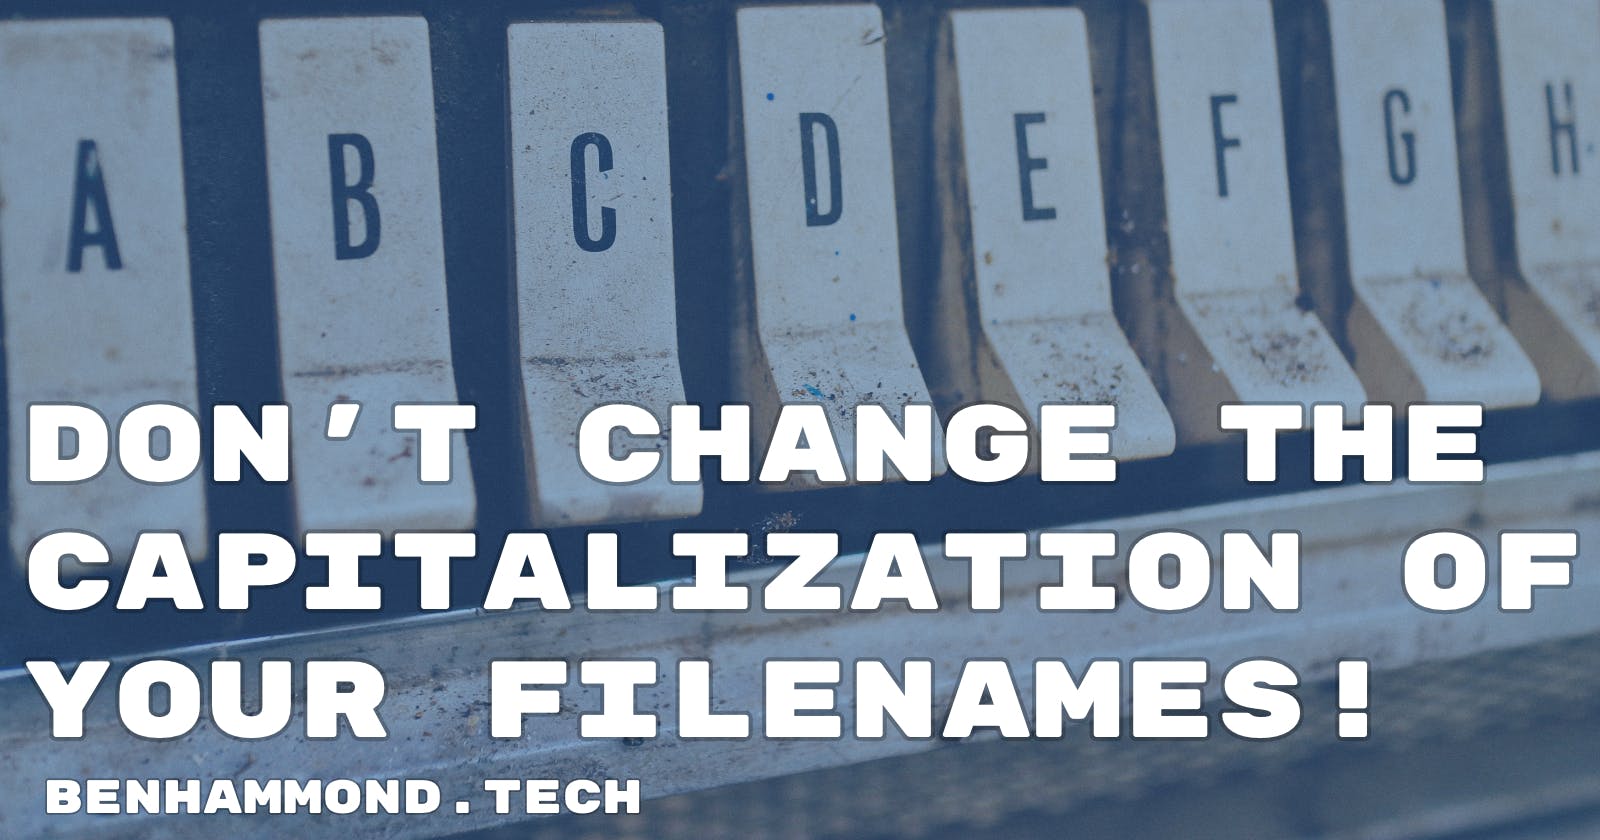 Don't Change the Capitalization of Your Filenames!